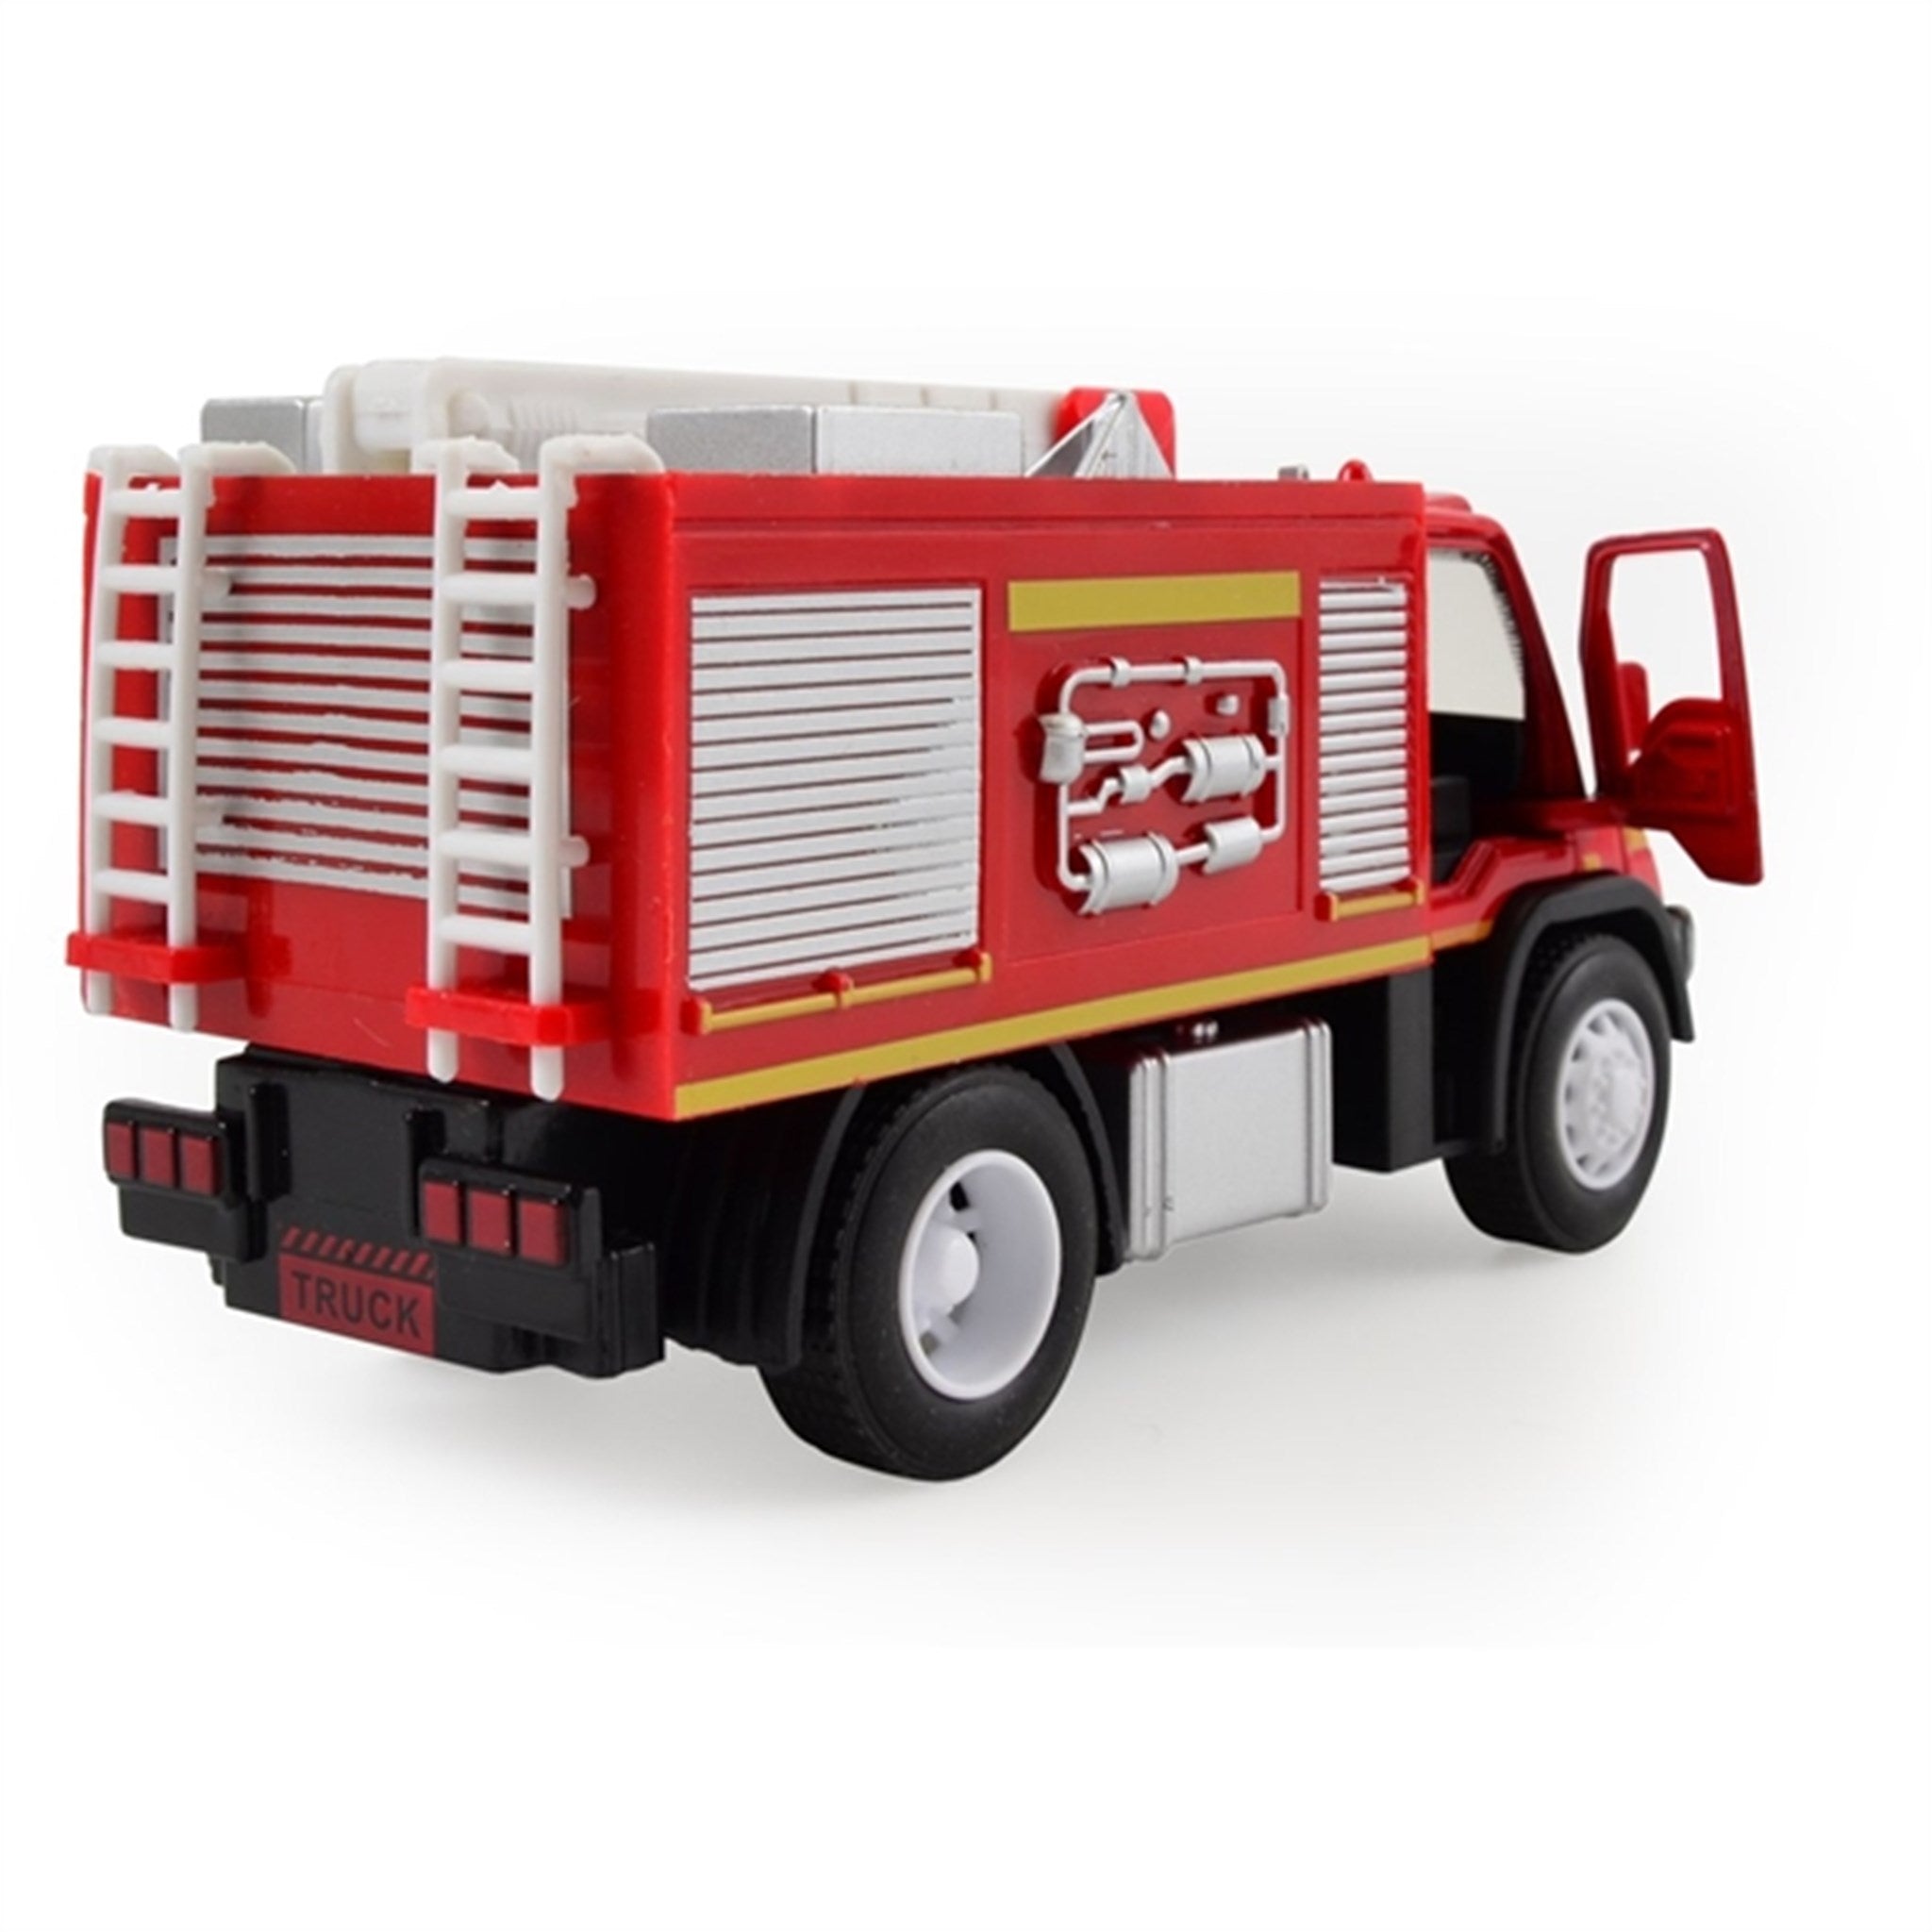 Magni Fire Truck Models With Sound And Light Rescue